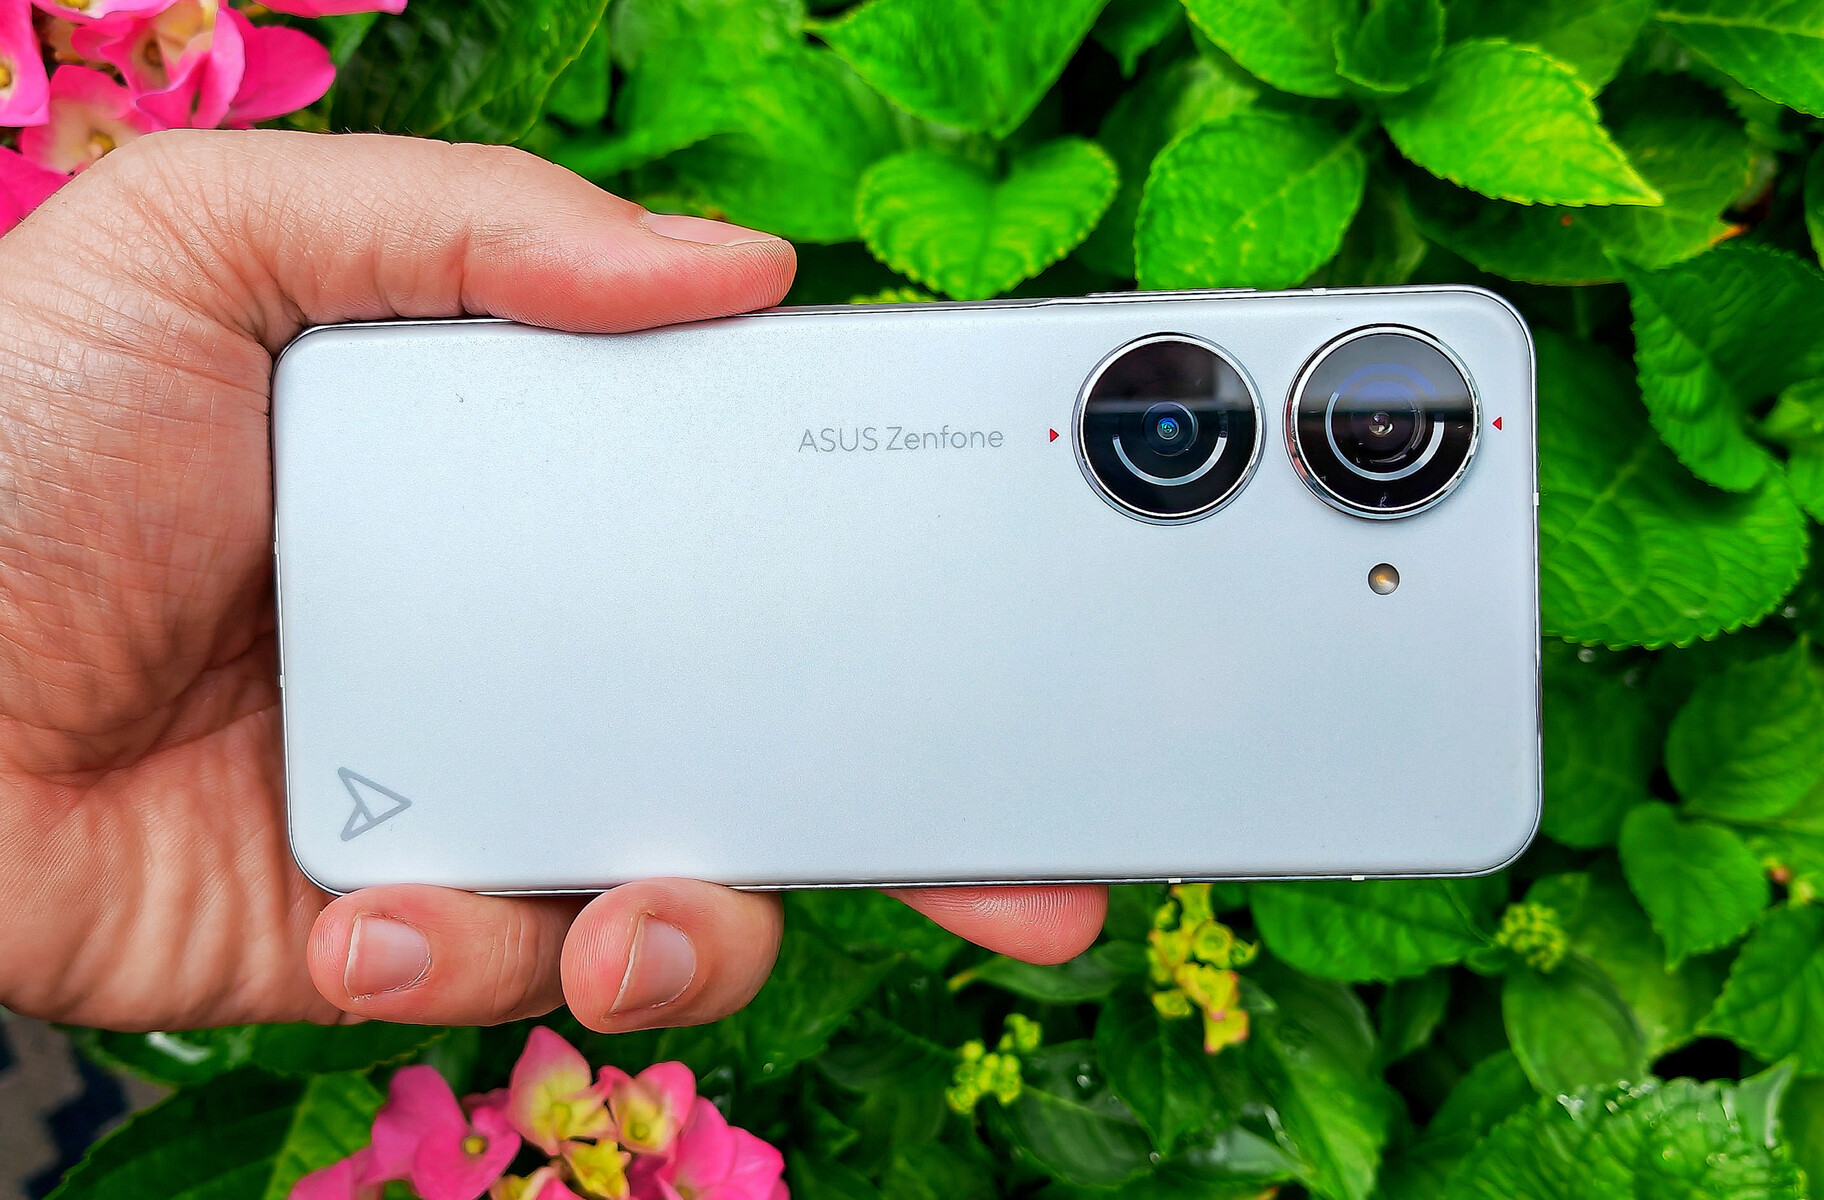 Asus Zenfone 10 Review: A Small Phone With Some Big Compromises - CNET